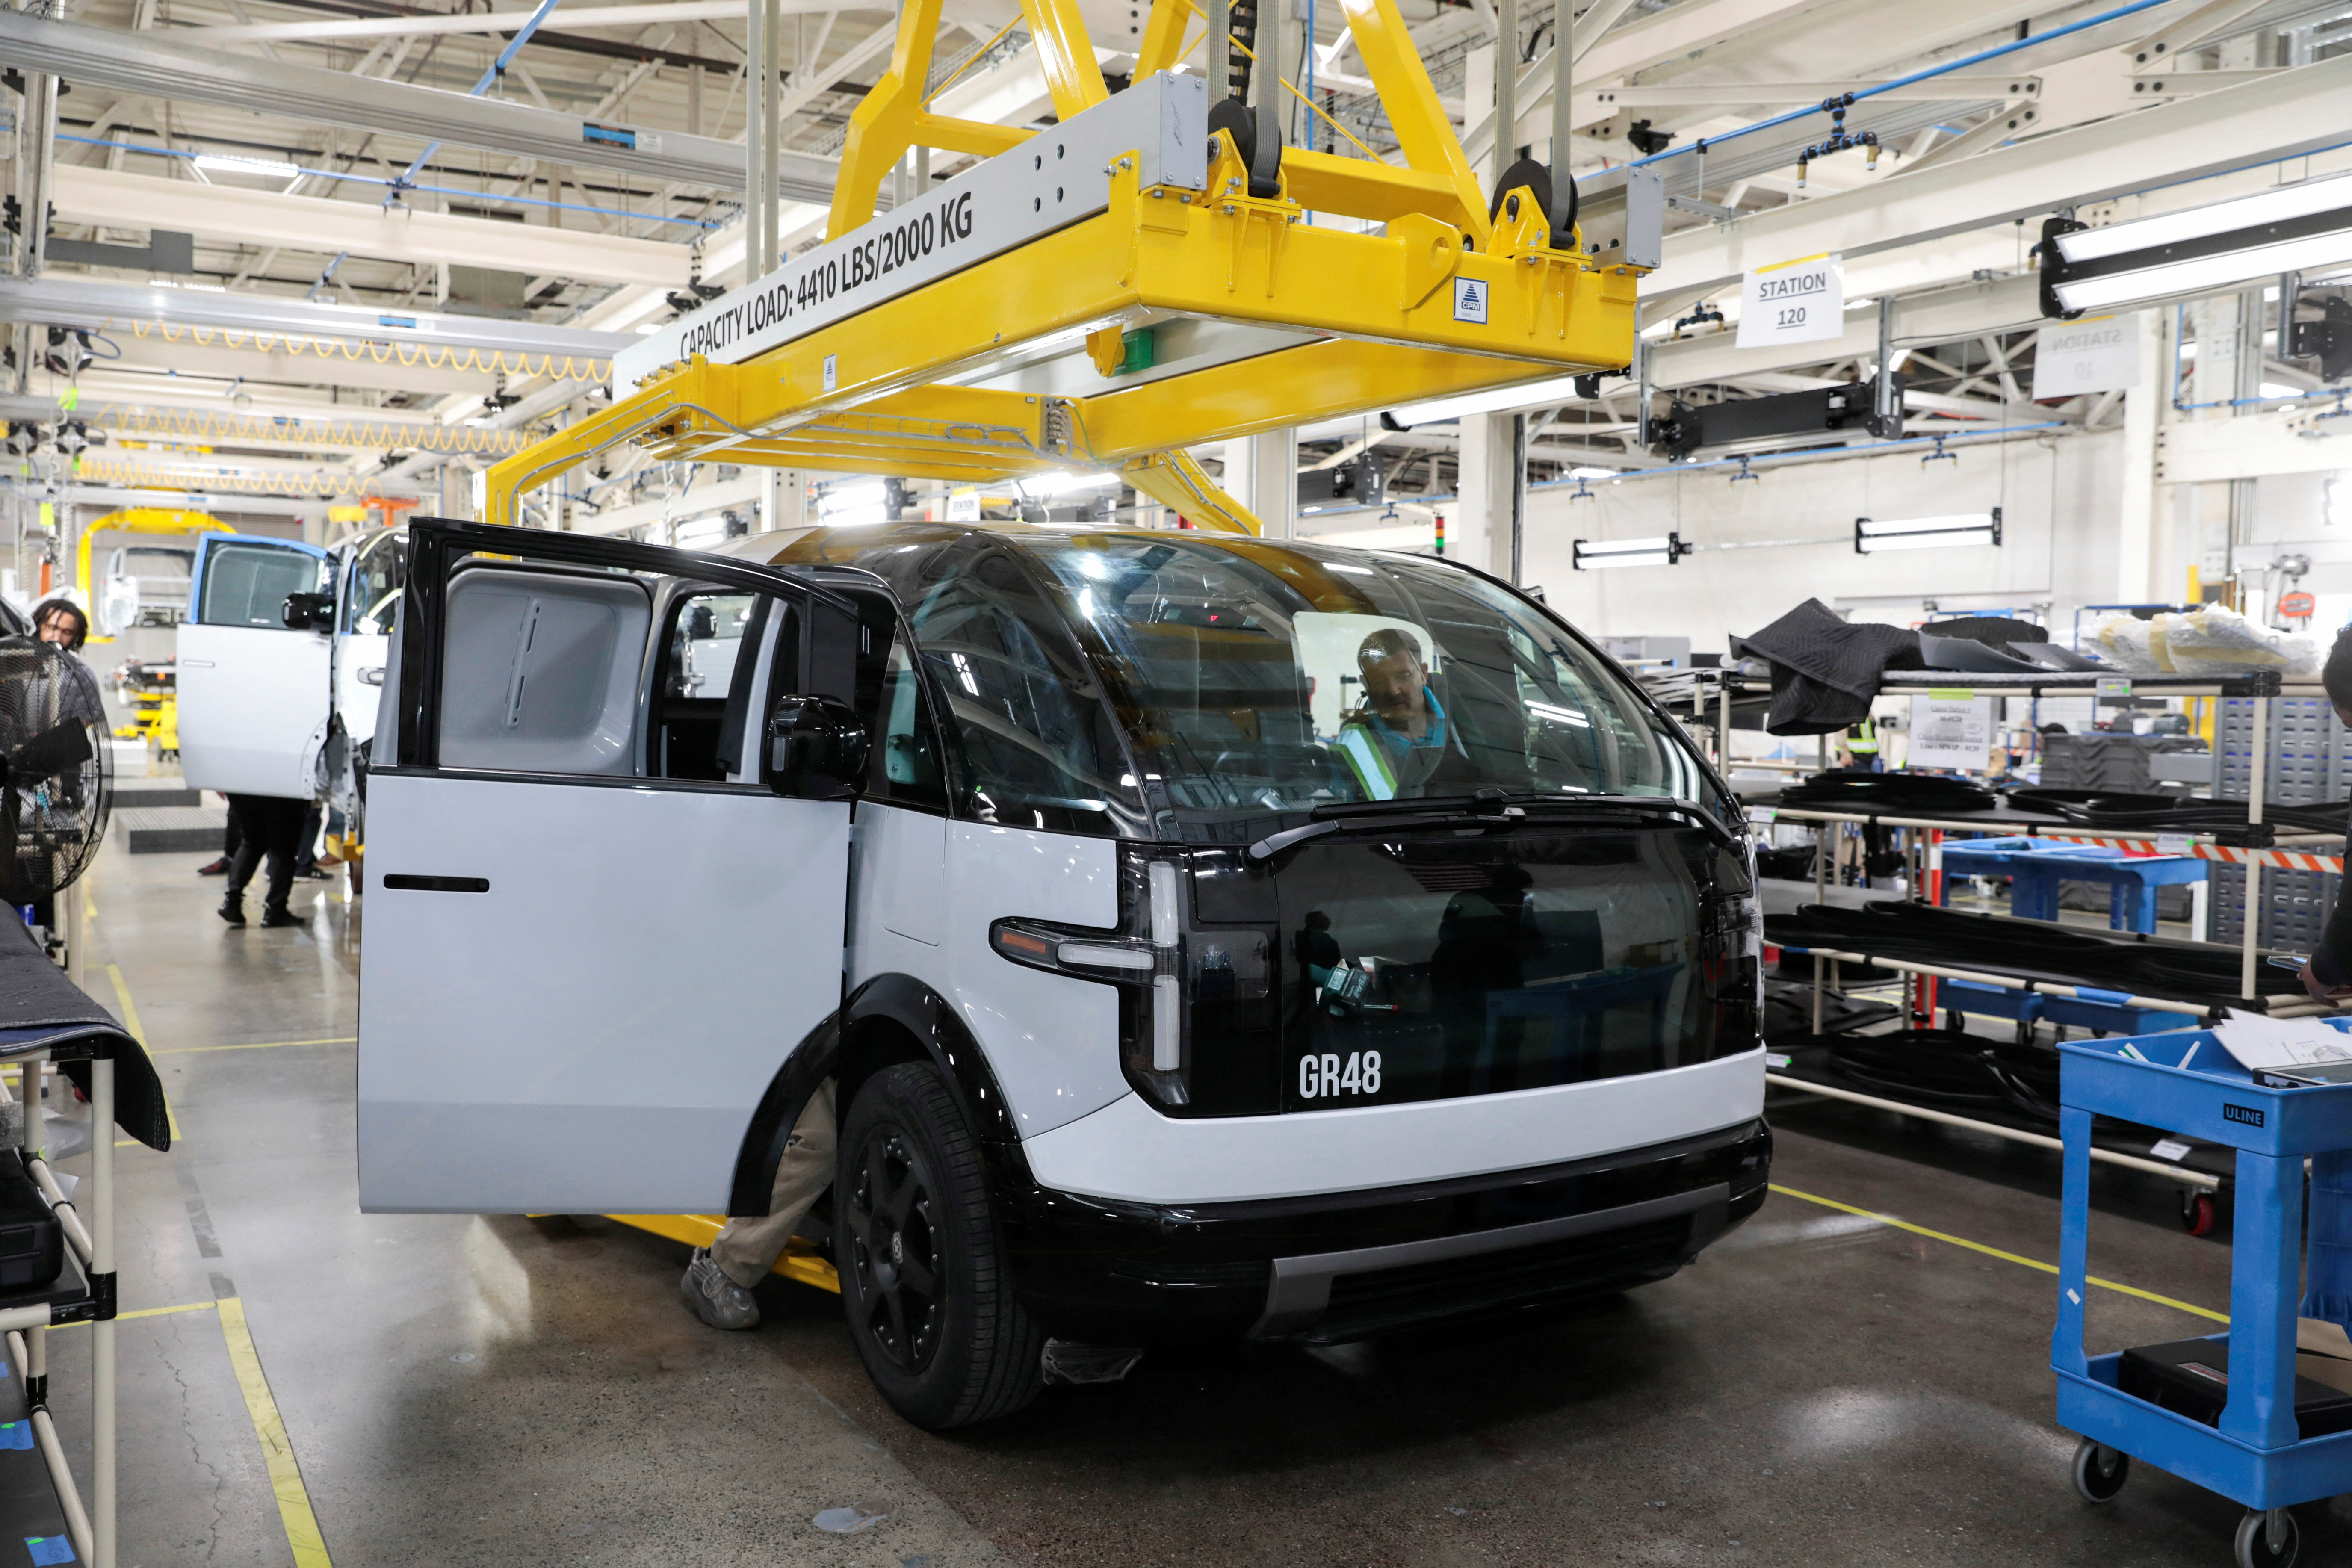 Production employees work on a Canoo electric vehicle at a manufacturing site